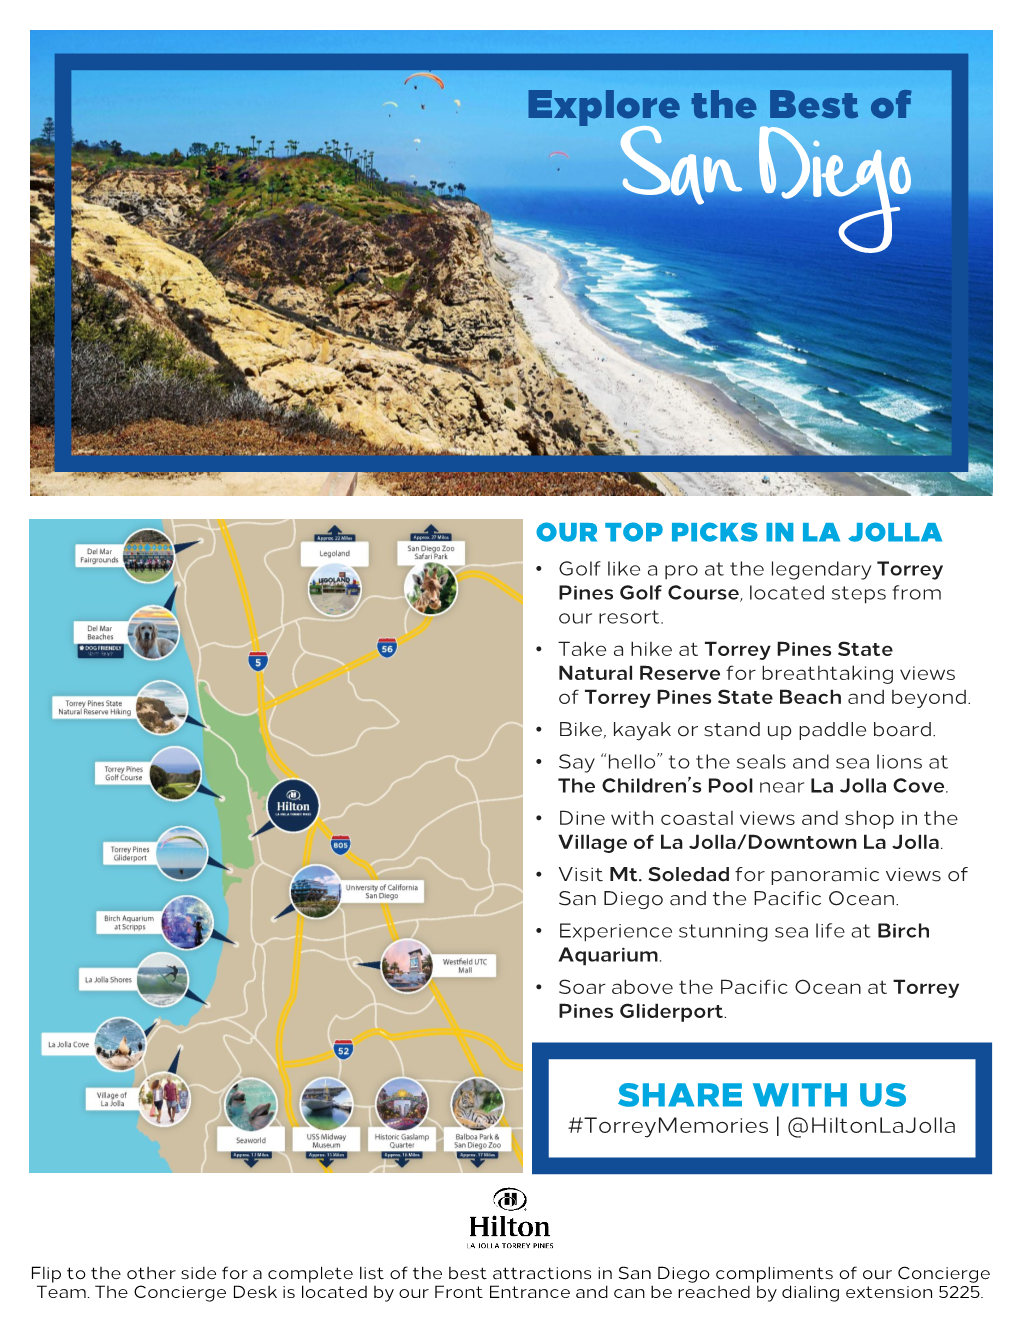 Explore the Best of San Diego